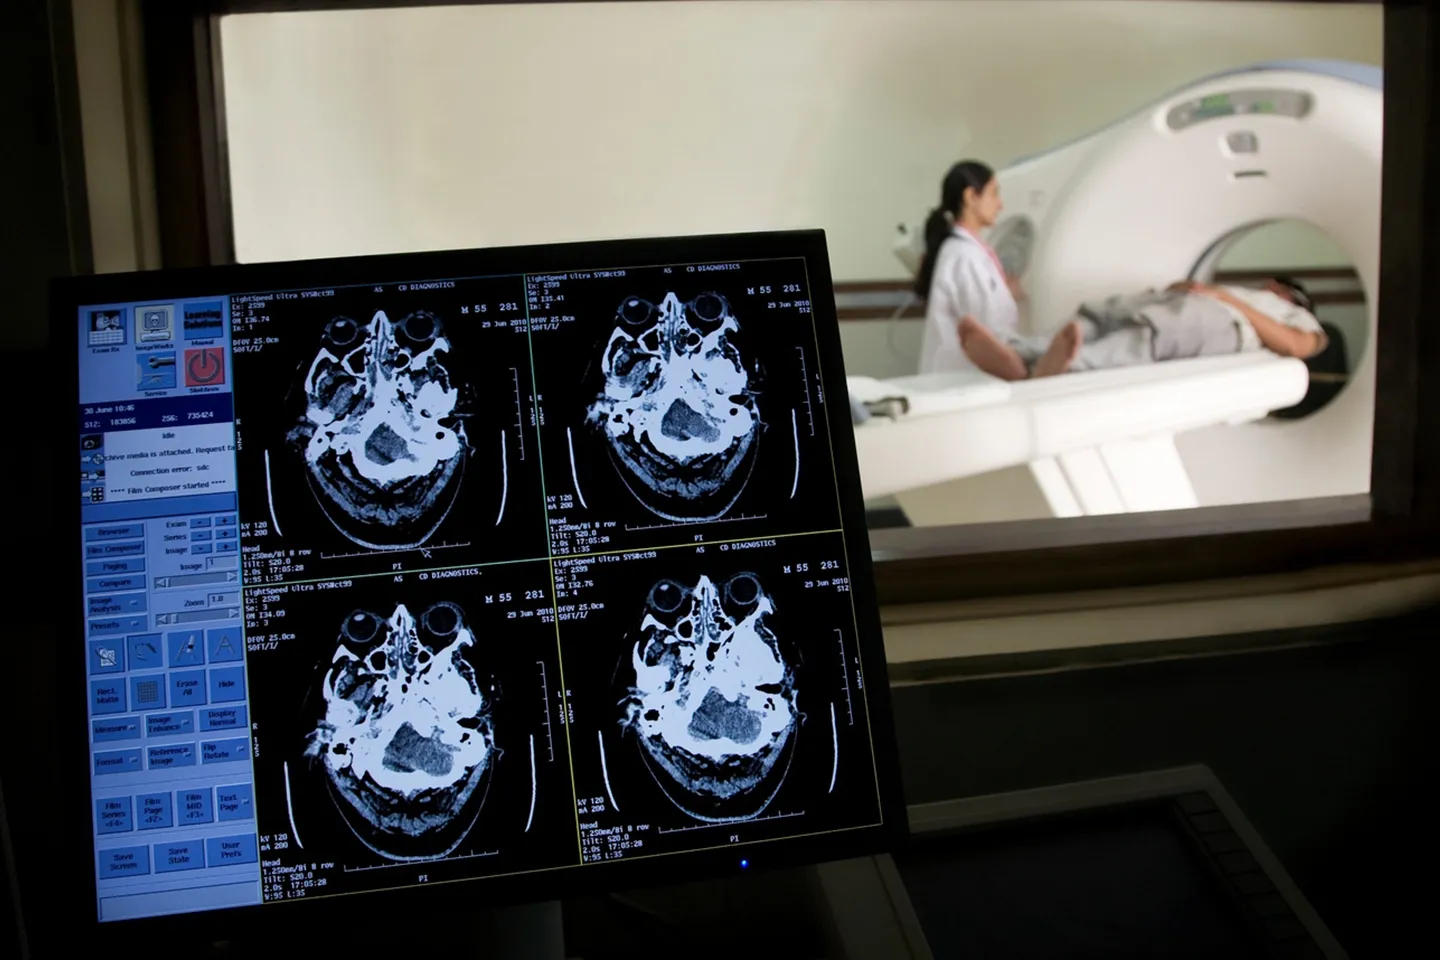 Image of MRI results are shown on a computer screen in foreground; technician with someone in an MRI scanner in the background.